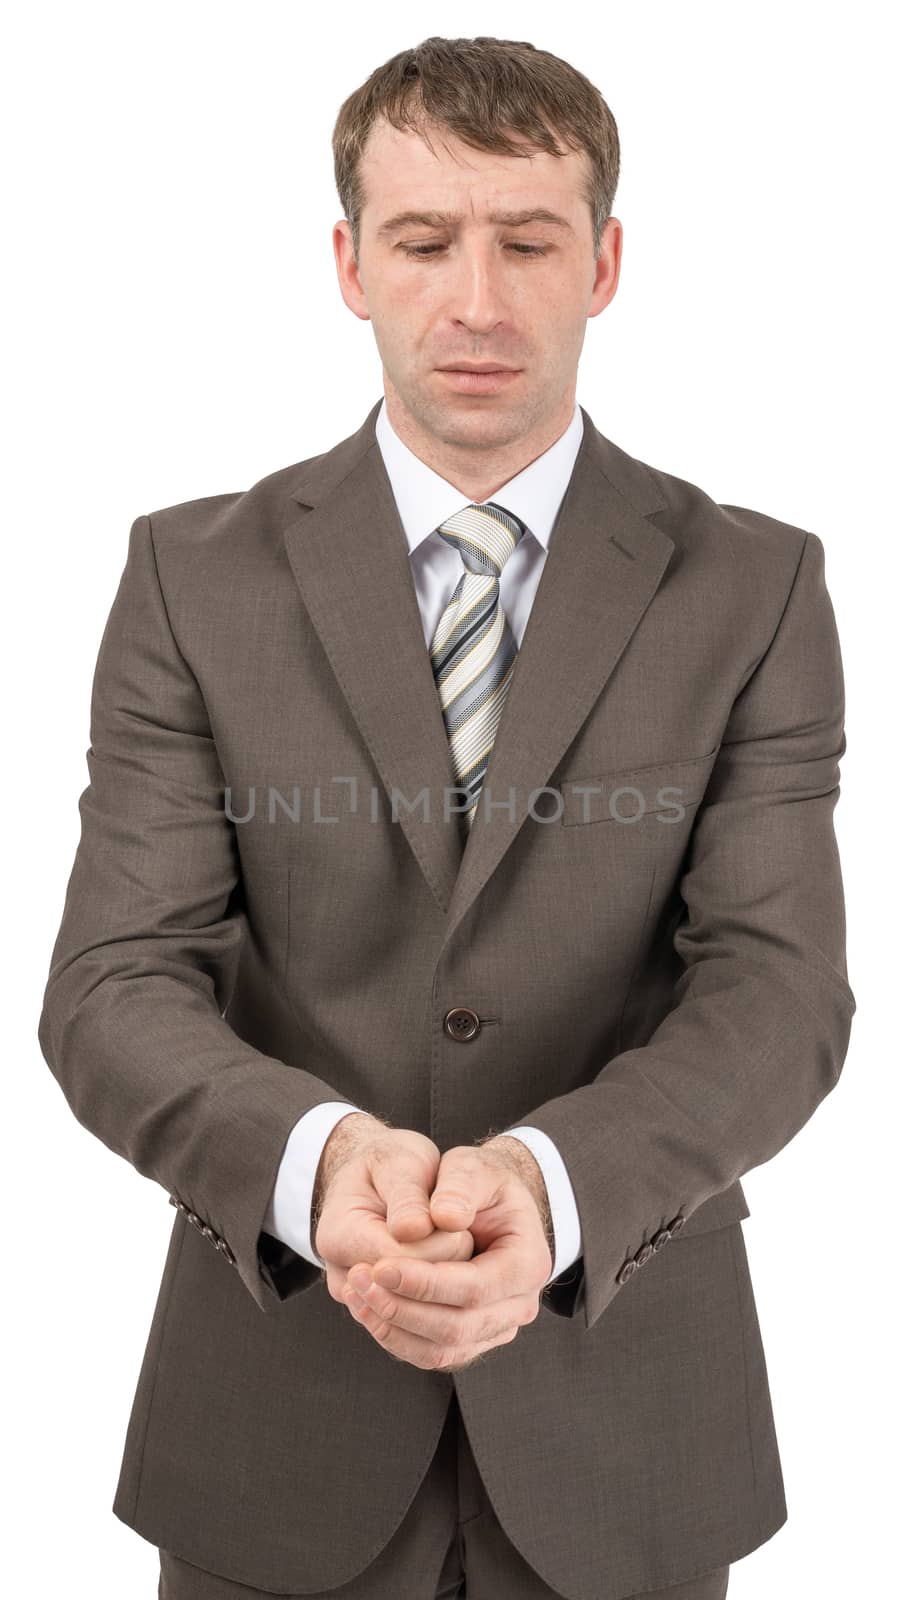 Unhappy businessman looking at his hands in front of him